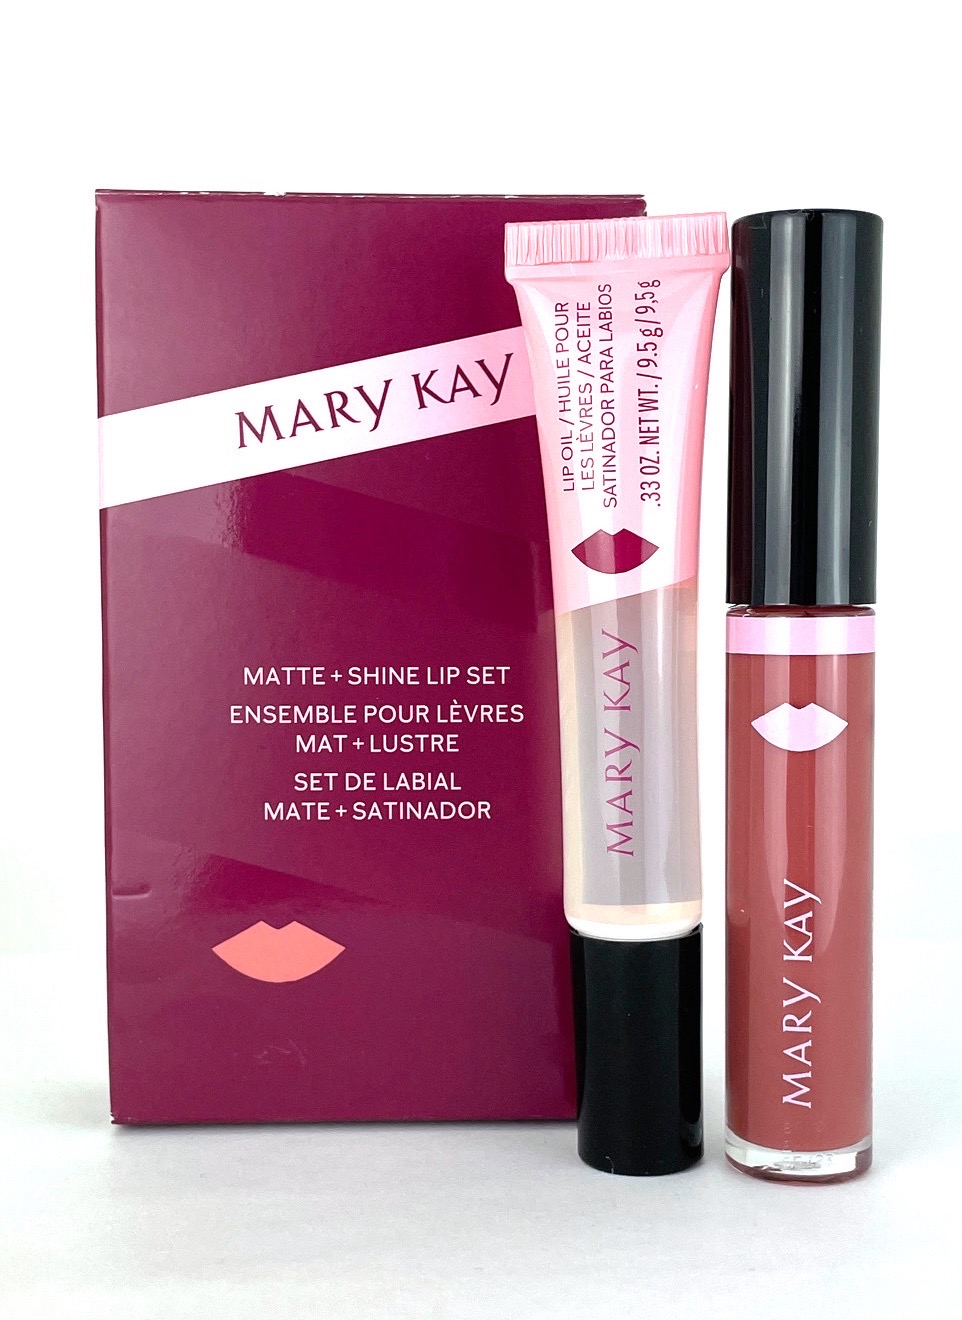 NEW Mary Kay Matte + Shine Lip Set Unboxing and Product Demo